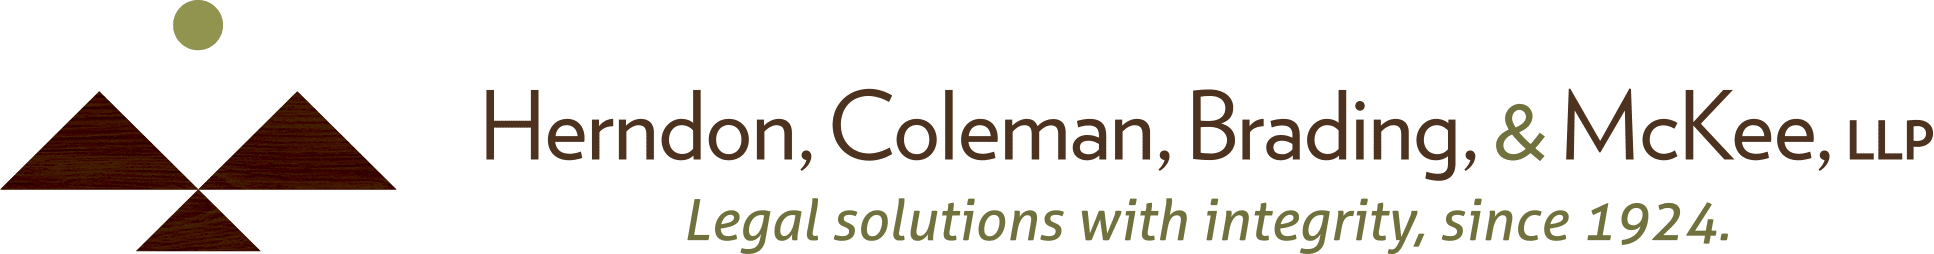 Herndon, Coleman, Brading, & McKee, LLP | Legal solutions with integrity, since 1924.